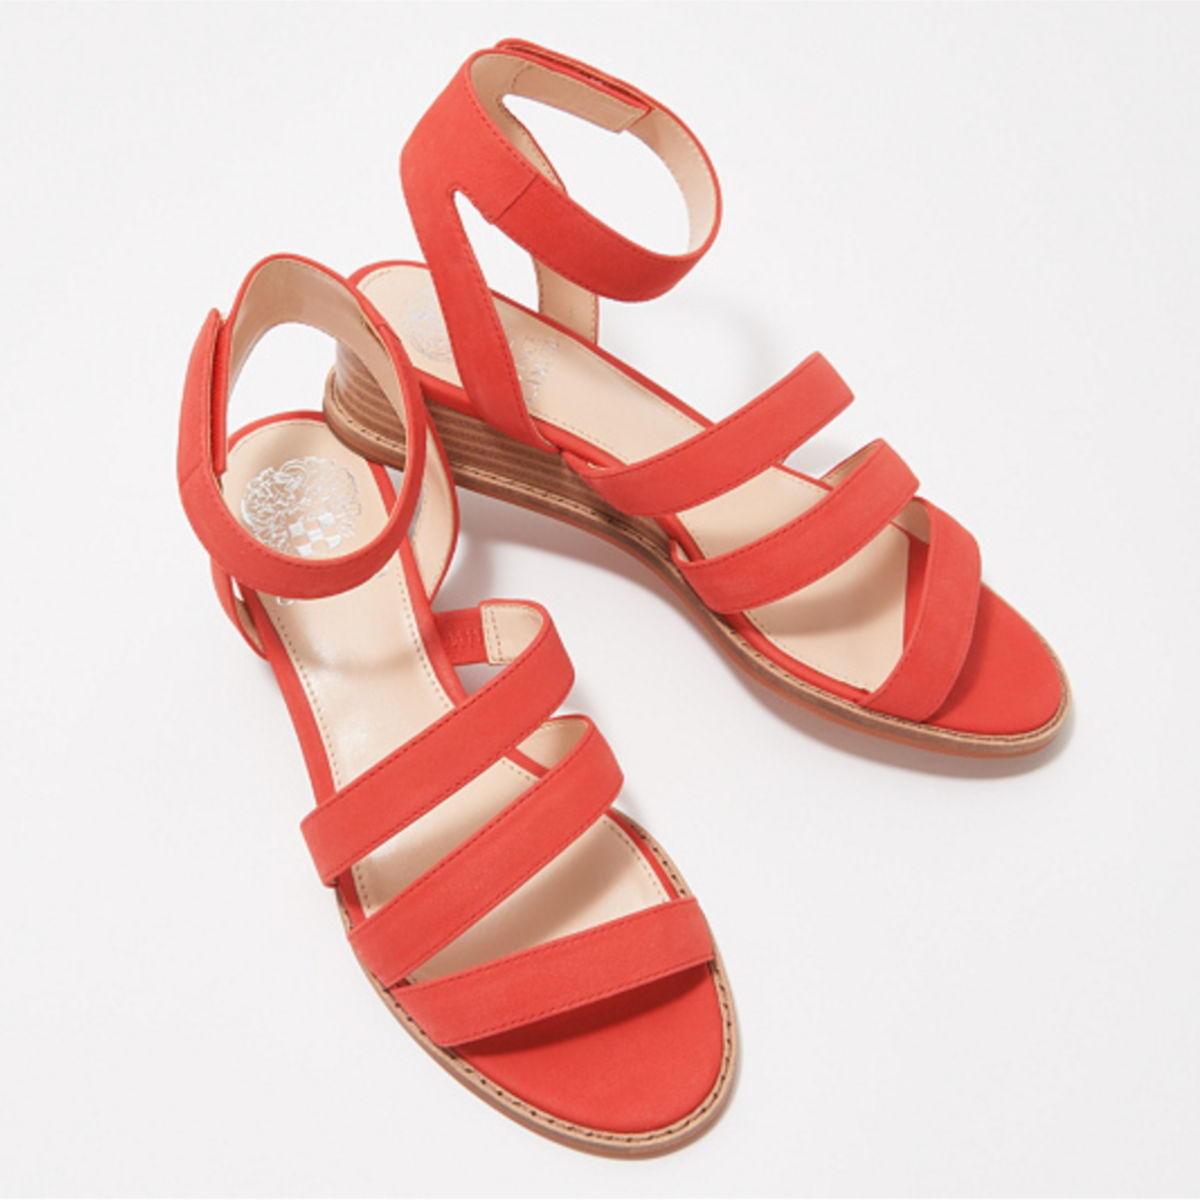 Vince Camuto Resensa Leather Demi-Wedge Sandals